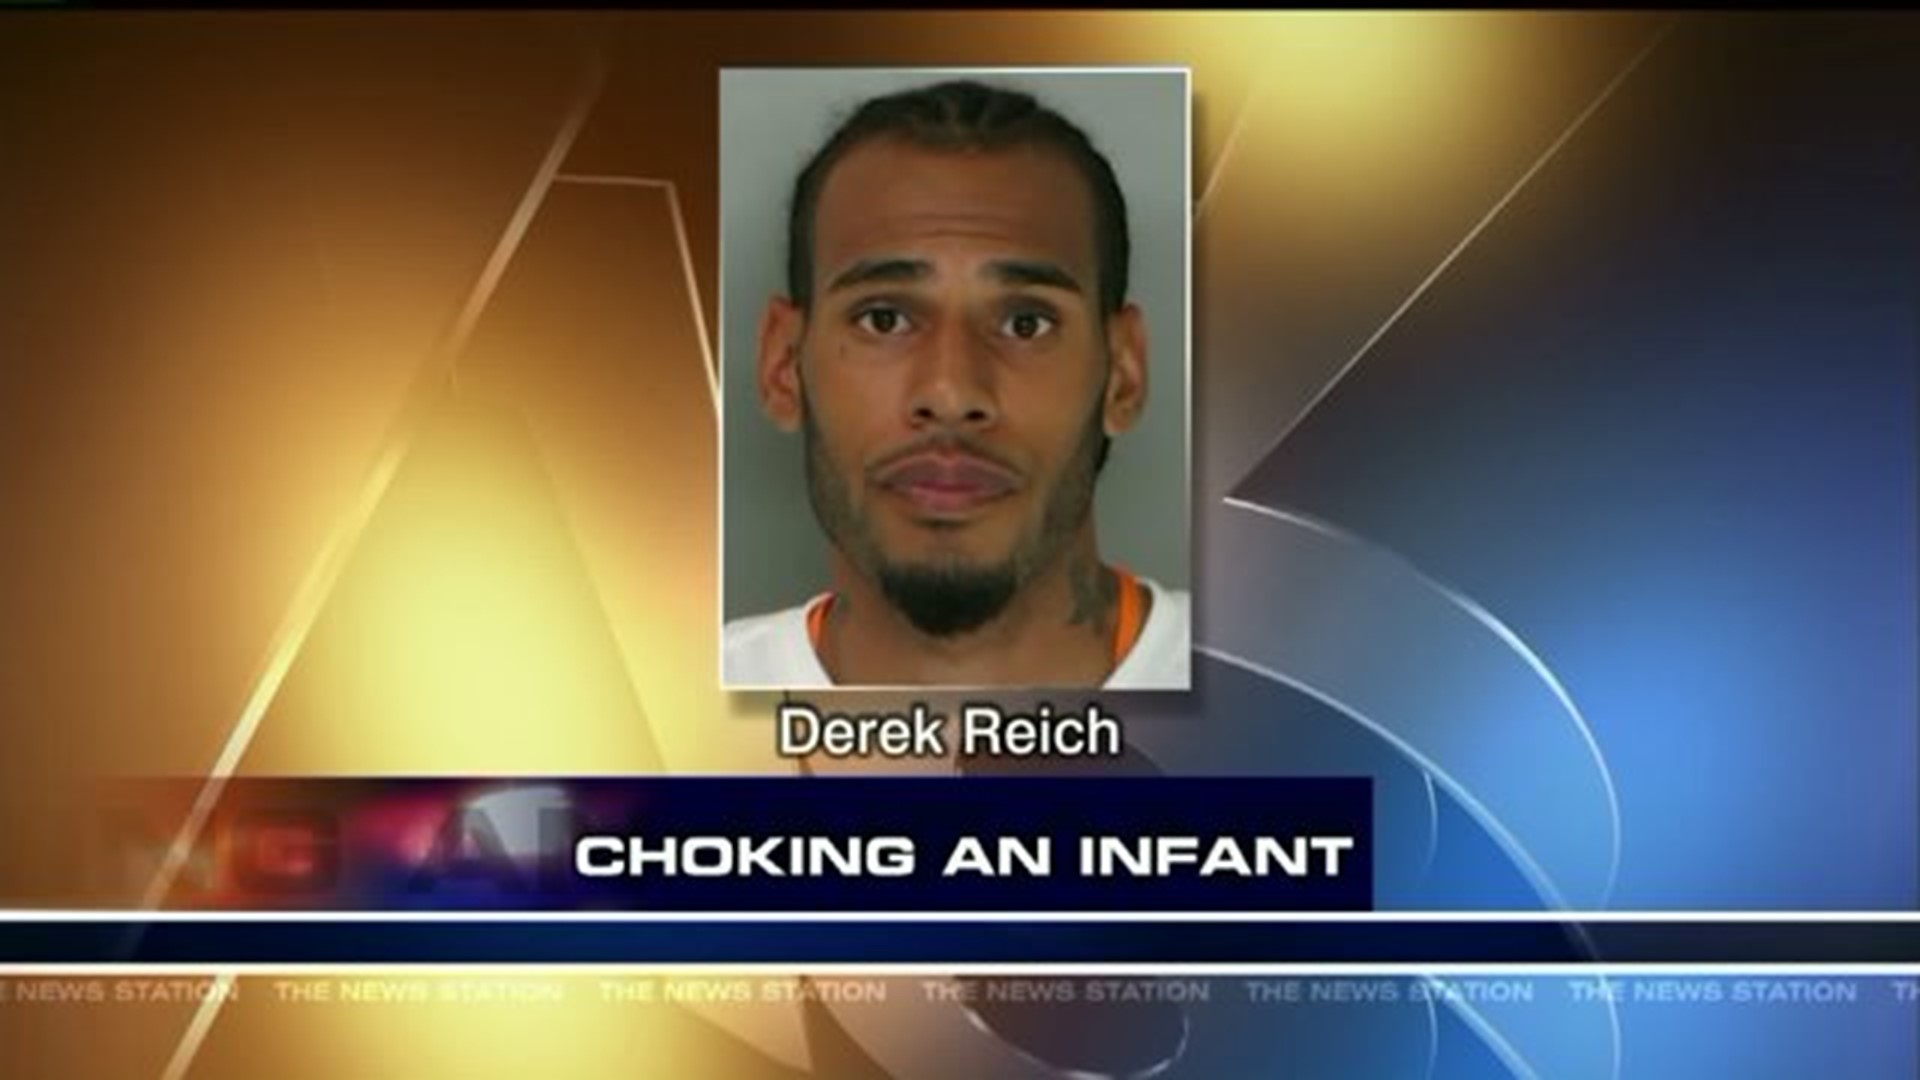 Police Catch Man Accused of Choking Infant and Escaping Police Custody